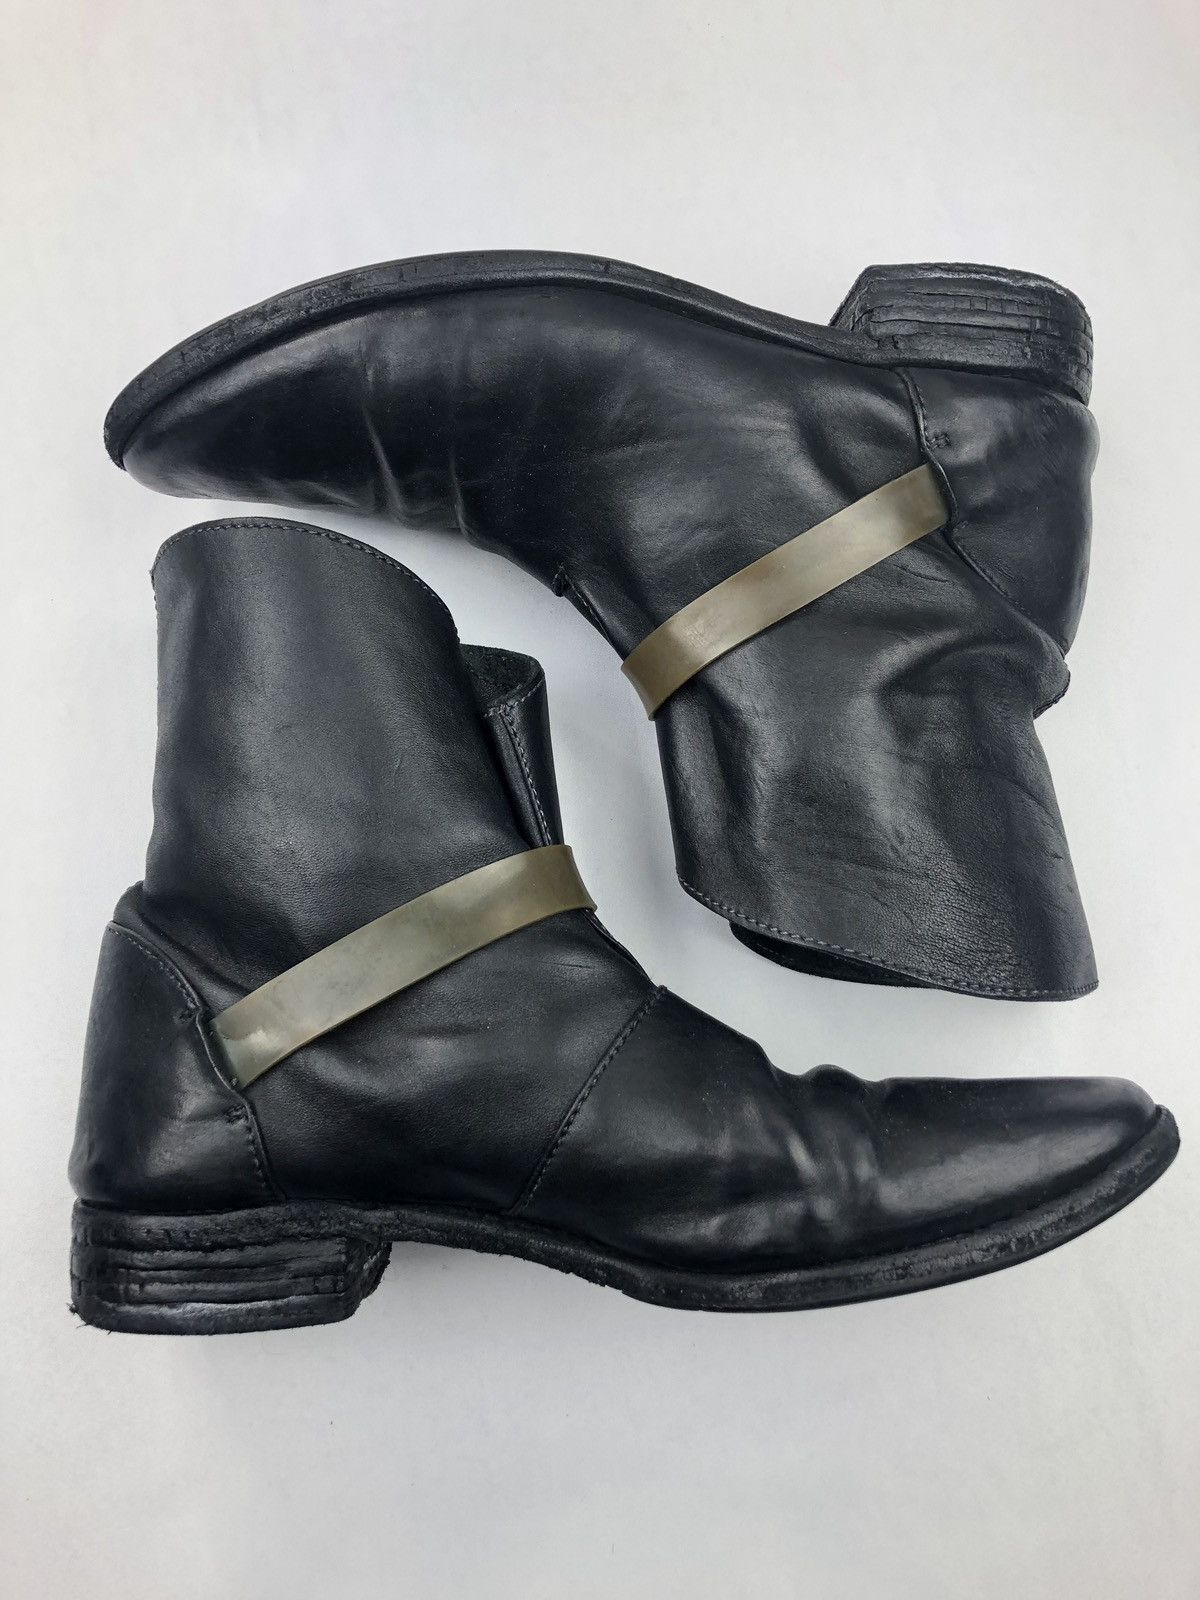 Carol Christian Poell CCP Rubber Band Boots | Grailed